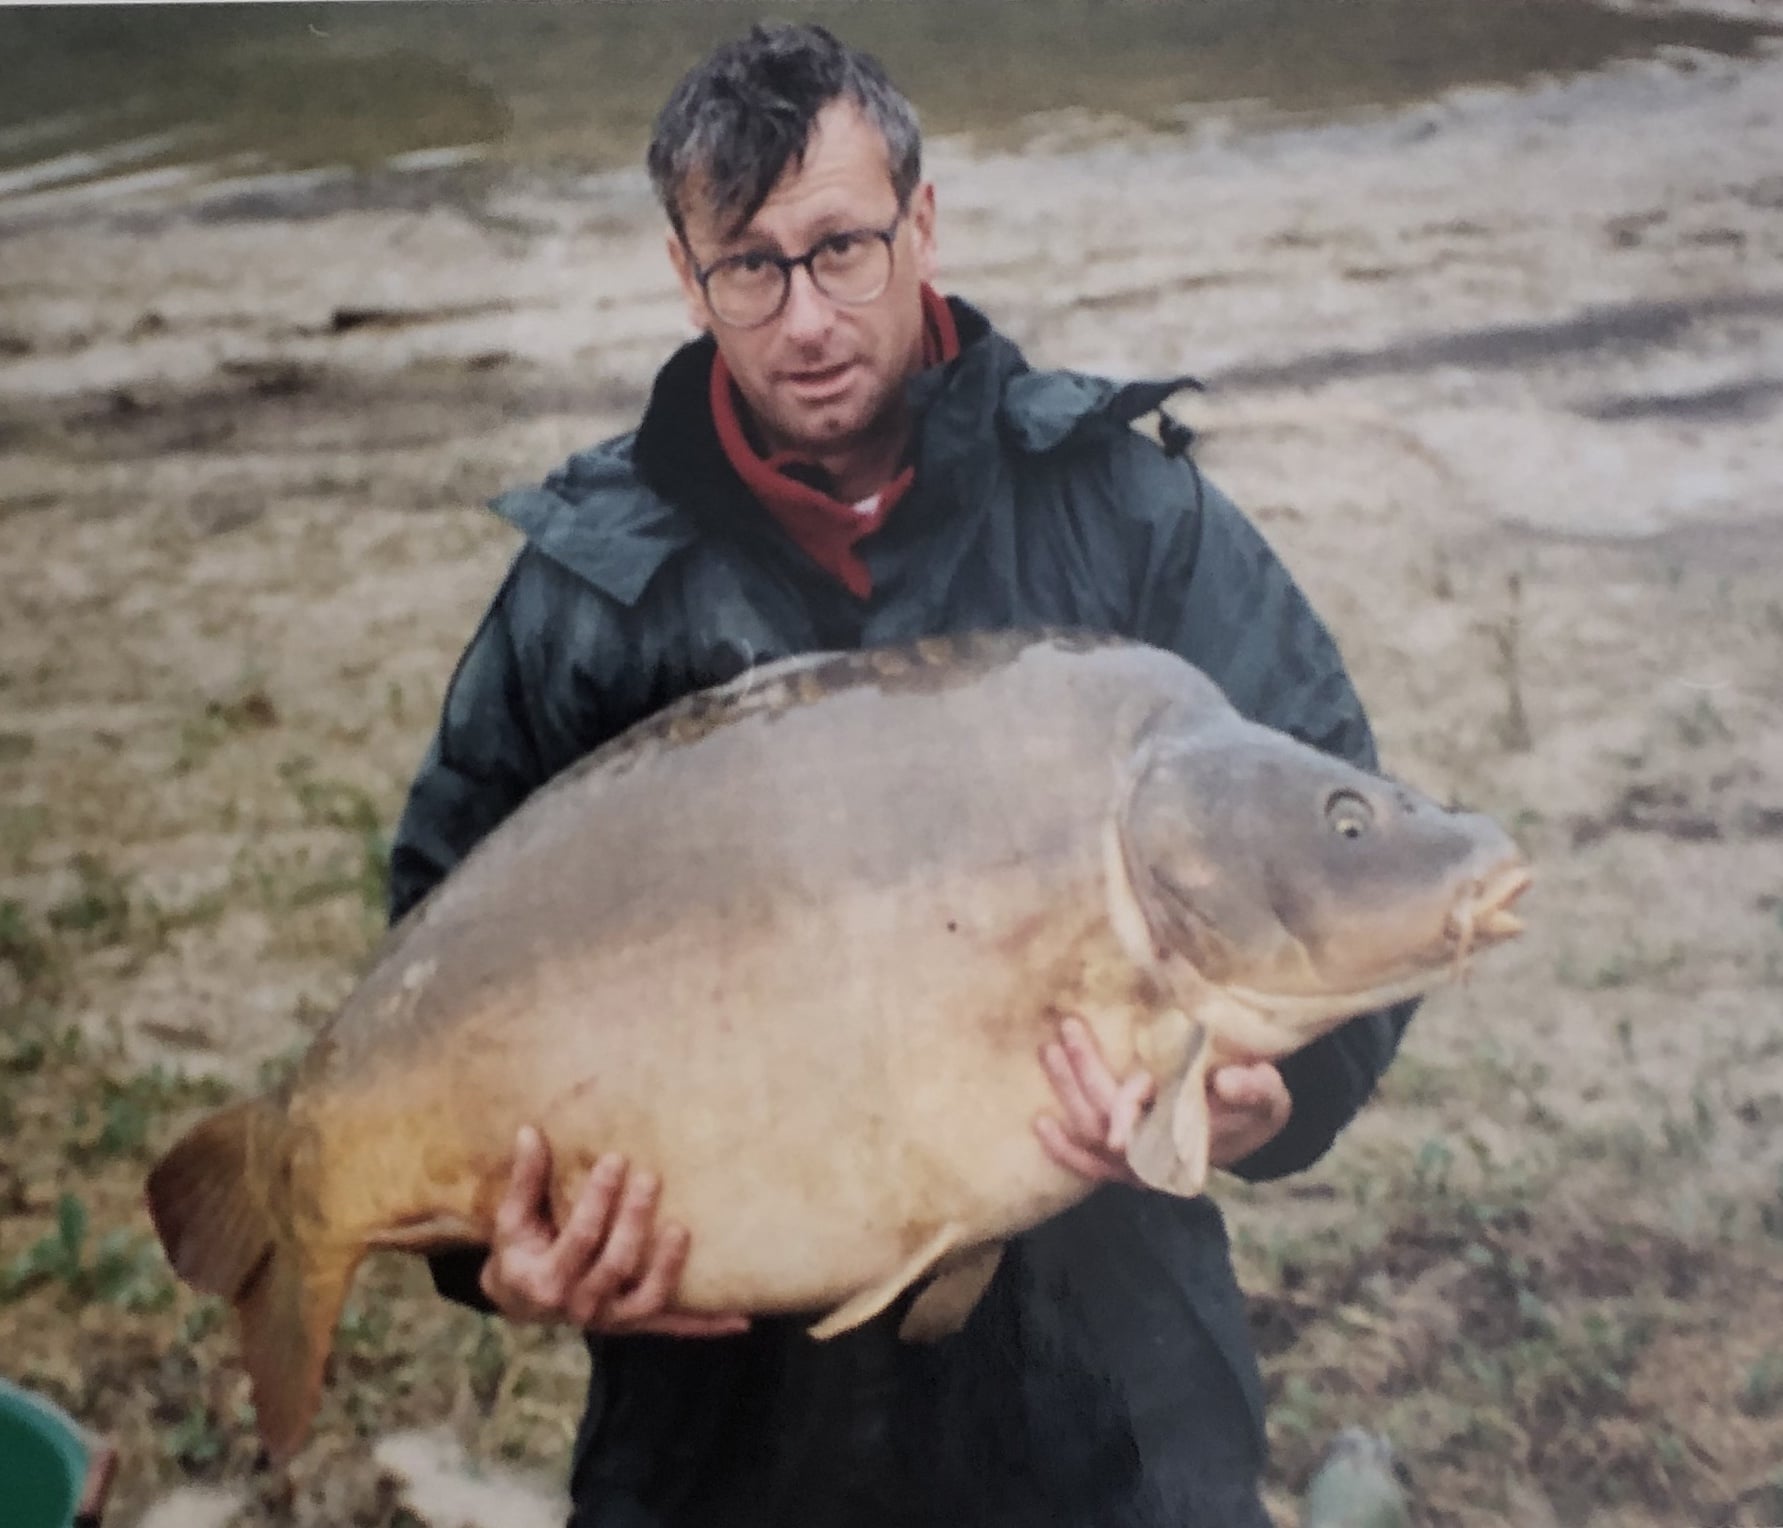 70lB Carp Caught in the 90s: Back to the Der and Record at Orient ... - Prize Carp 70lb Capture In France In The 90s